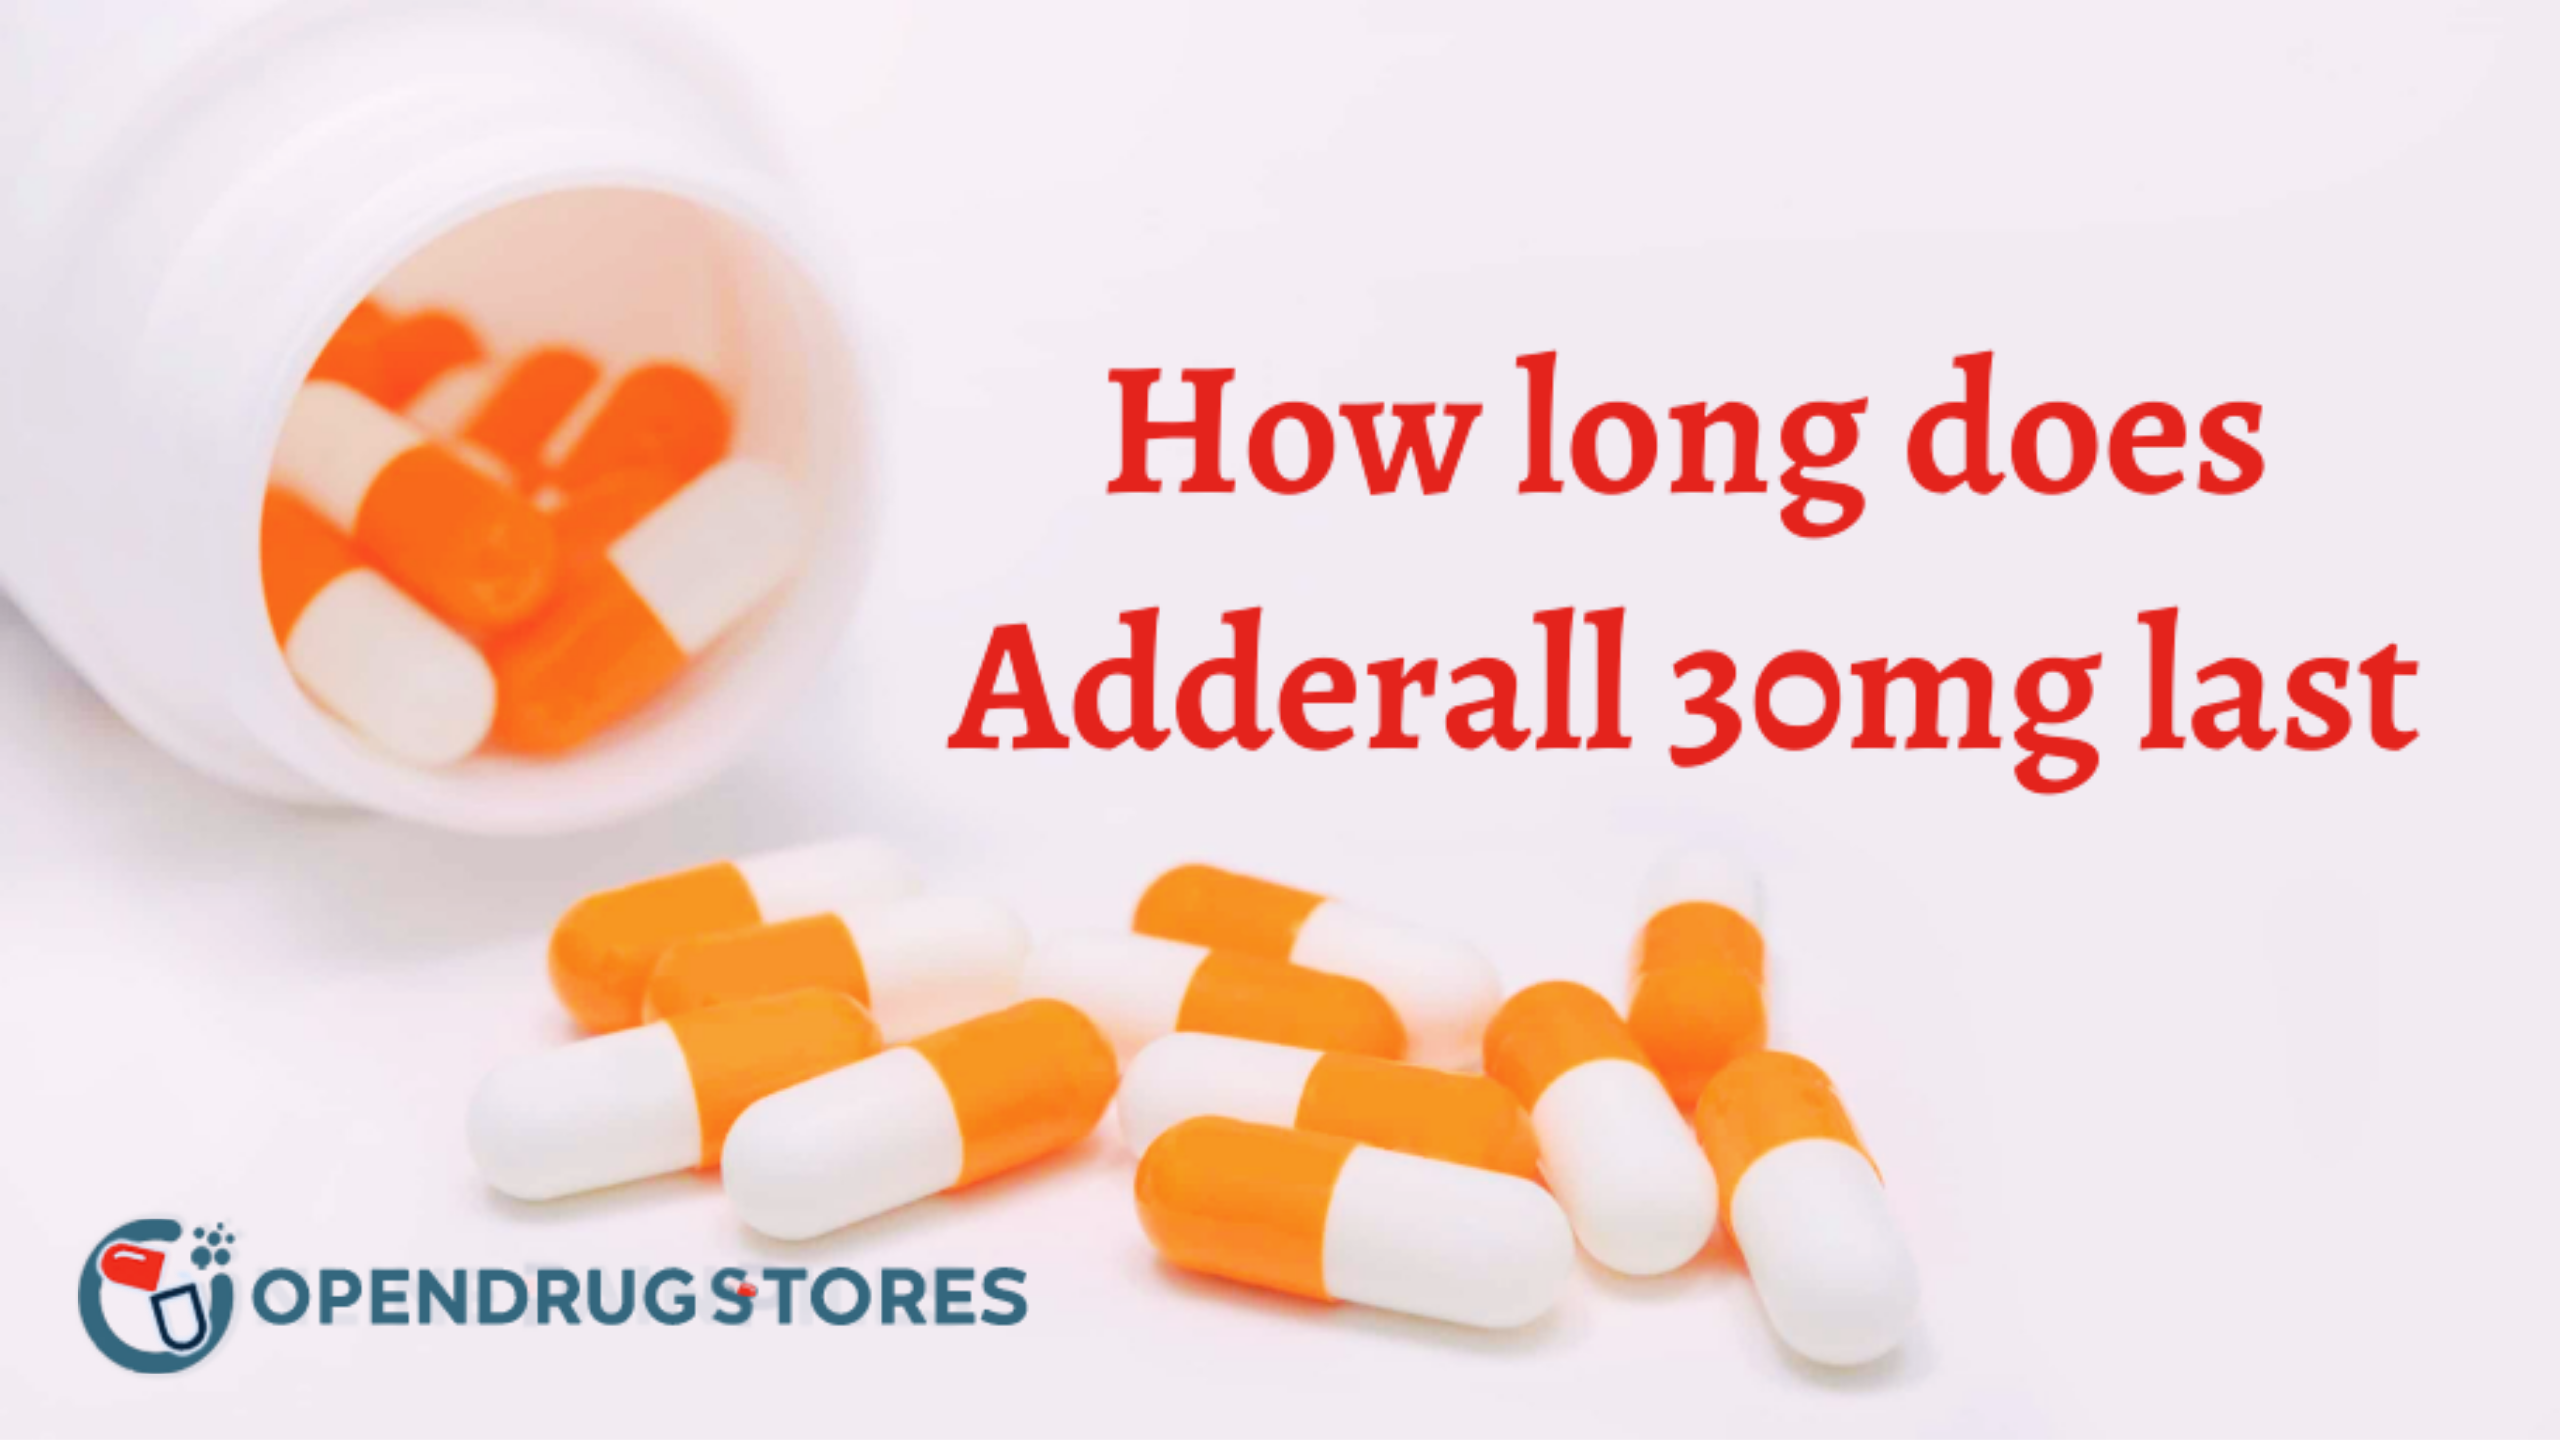 How long does Adderall 30mg last